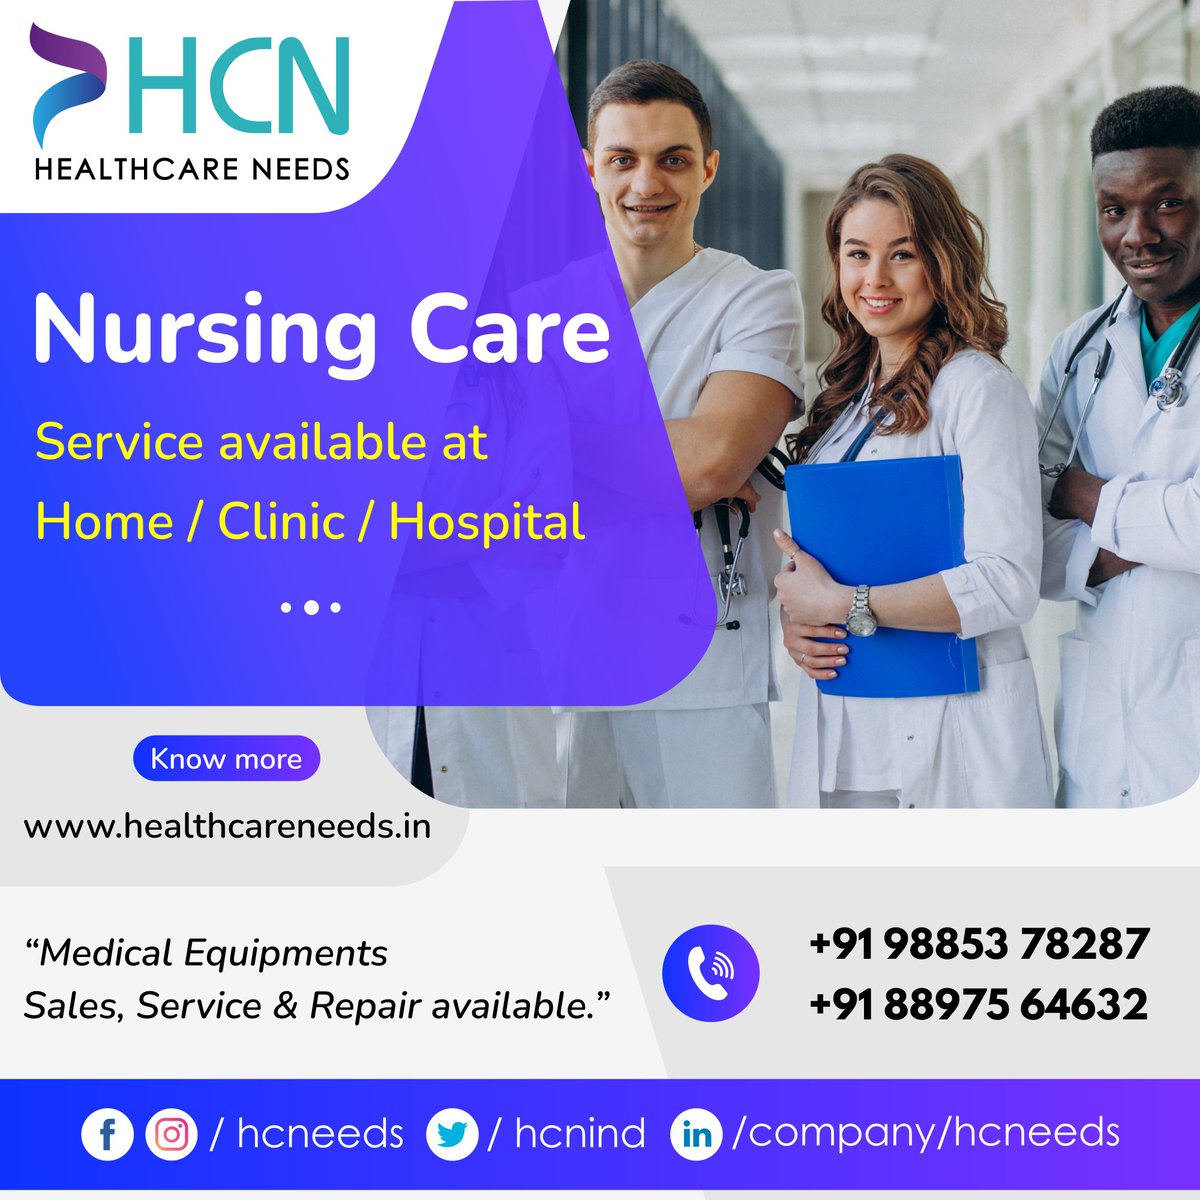 Nursing Care Service available at your home/clinic/hospital.
Medical equipment Sales, Rentals, Service and Repair available.

Nurses are the professionals who provide health care to patients as well as healthy individuals.

Know more ->bit.ly/34irmN0